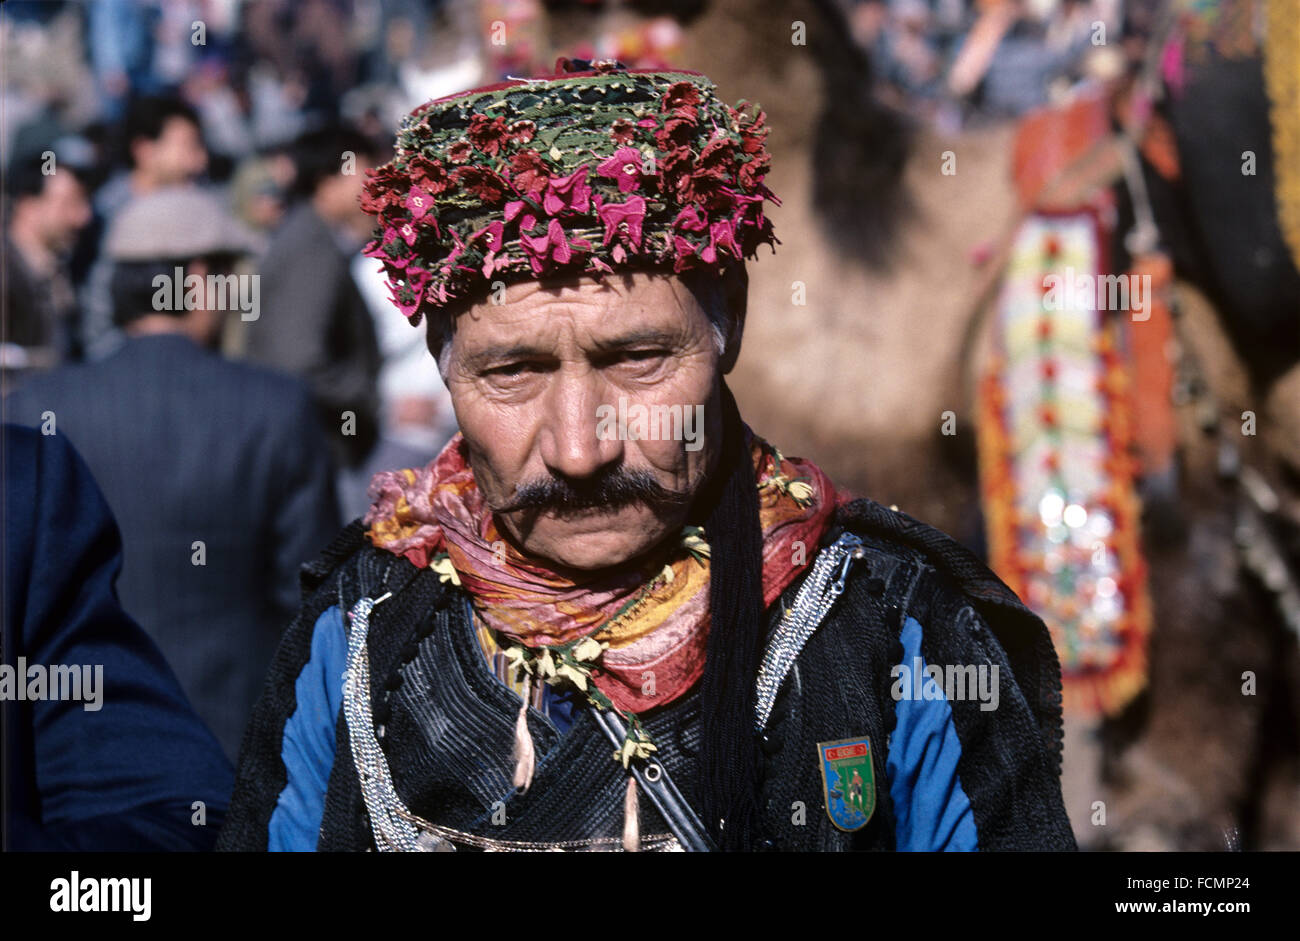 Portrait of a Turkish Men Wearing a Moustache and Traditional Turkish Dress, or Traditional Aegean Military Costume, known as Zeybek and Head Wear at the Annual Camel Wrestling Championship, Ephesus, Turkey Stock Photo